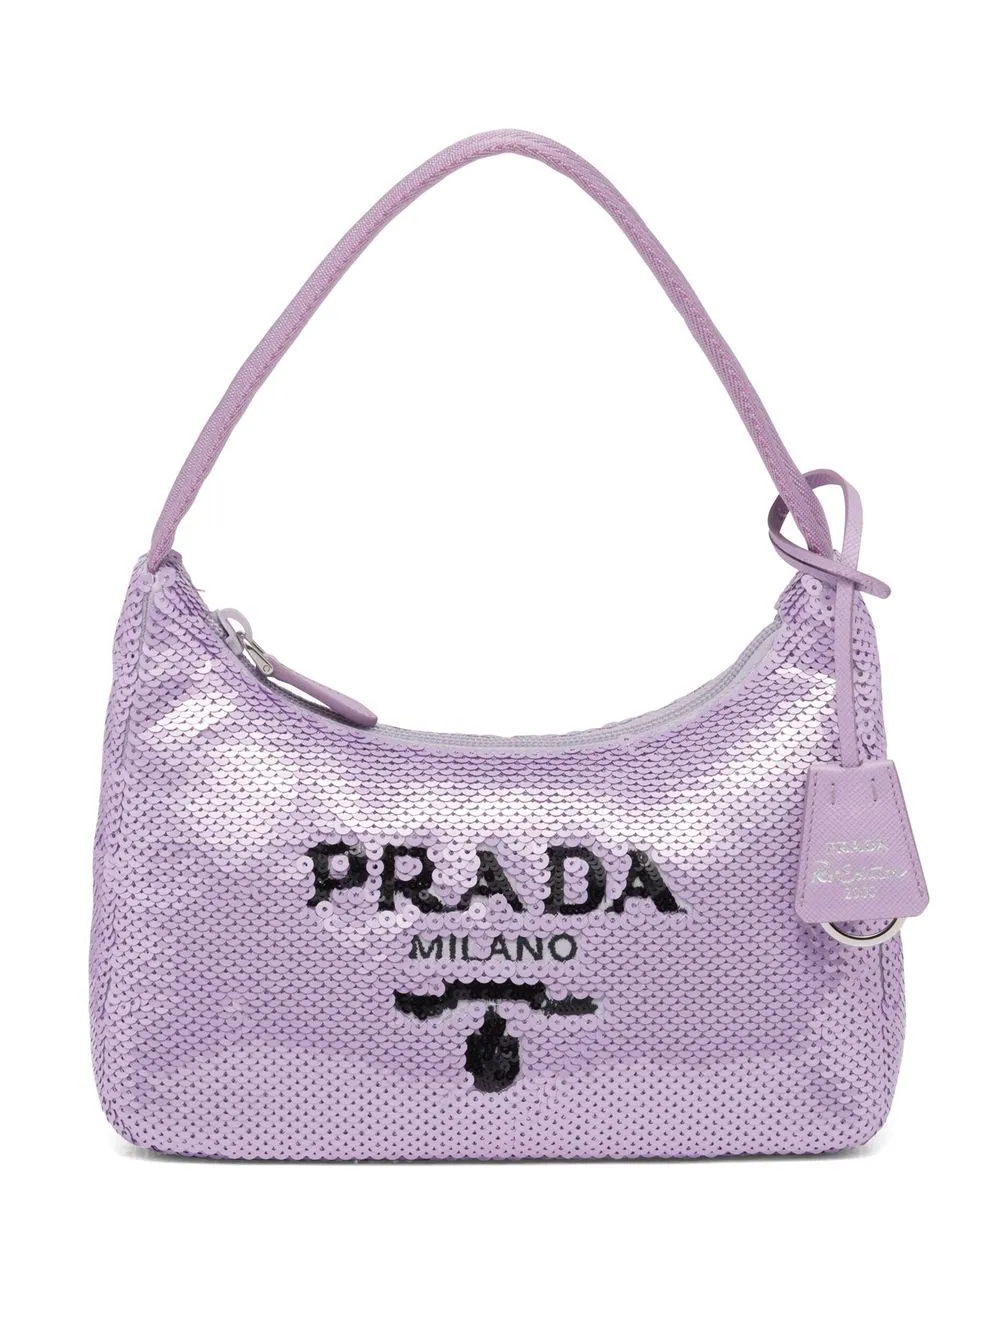 my first designer bag unboxing/styling  prada re-edition 2005 in saffiano  leather wisteria 